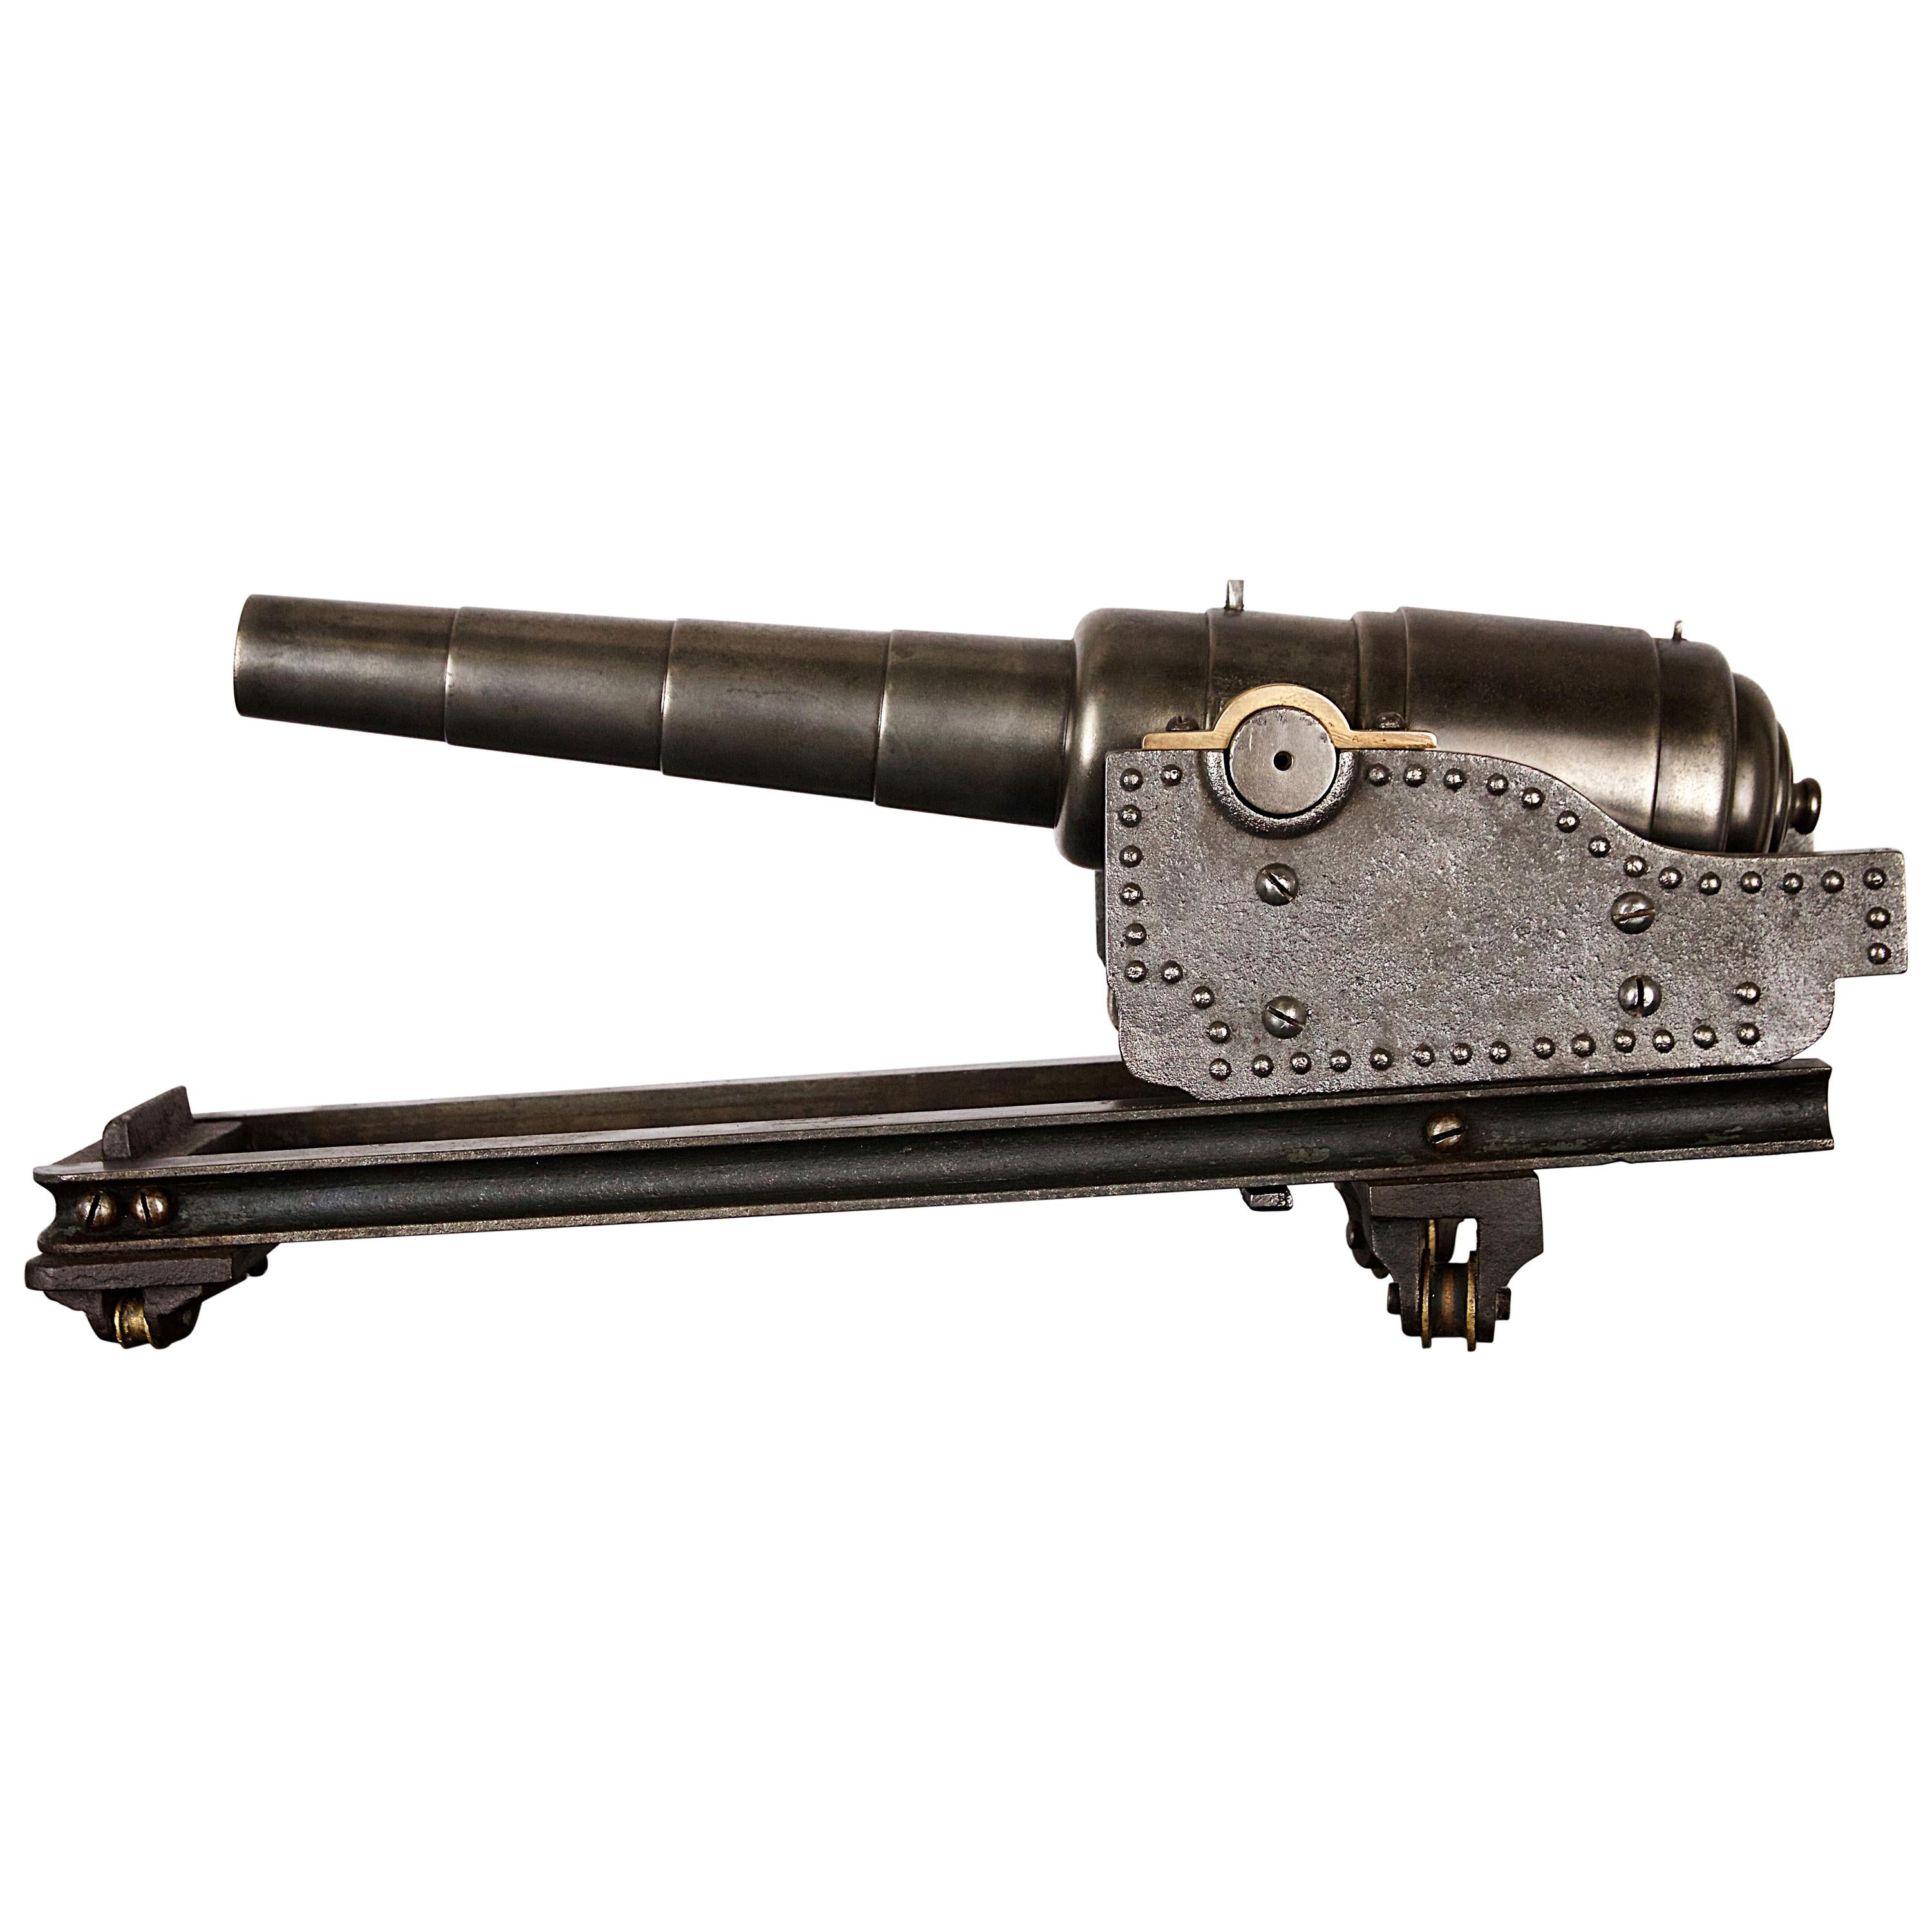 Steel Model of a 64 Pound Canon on Elevating Carriage, circa 1860